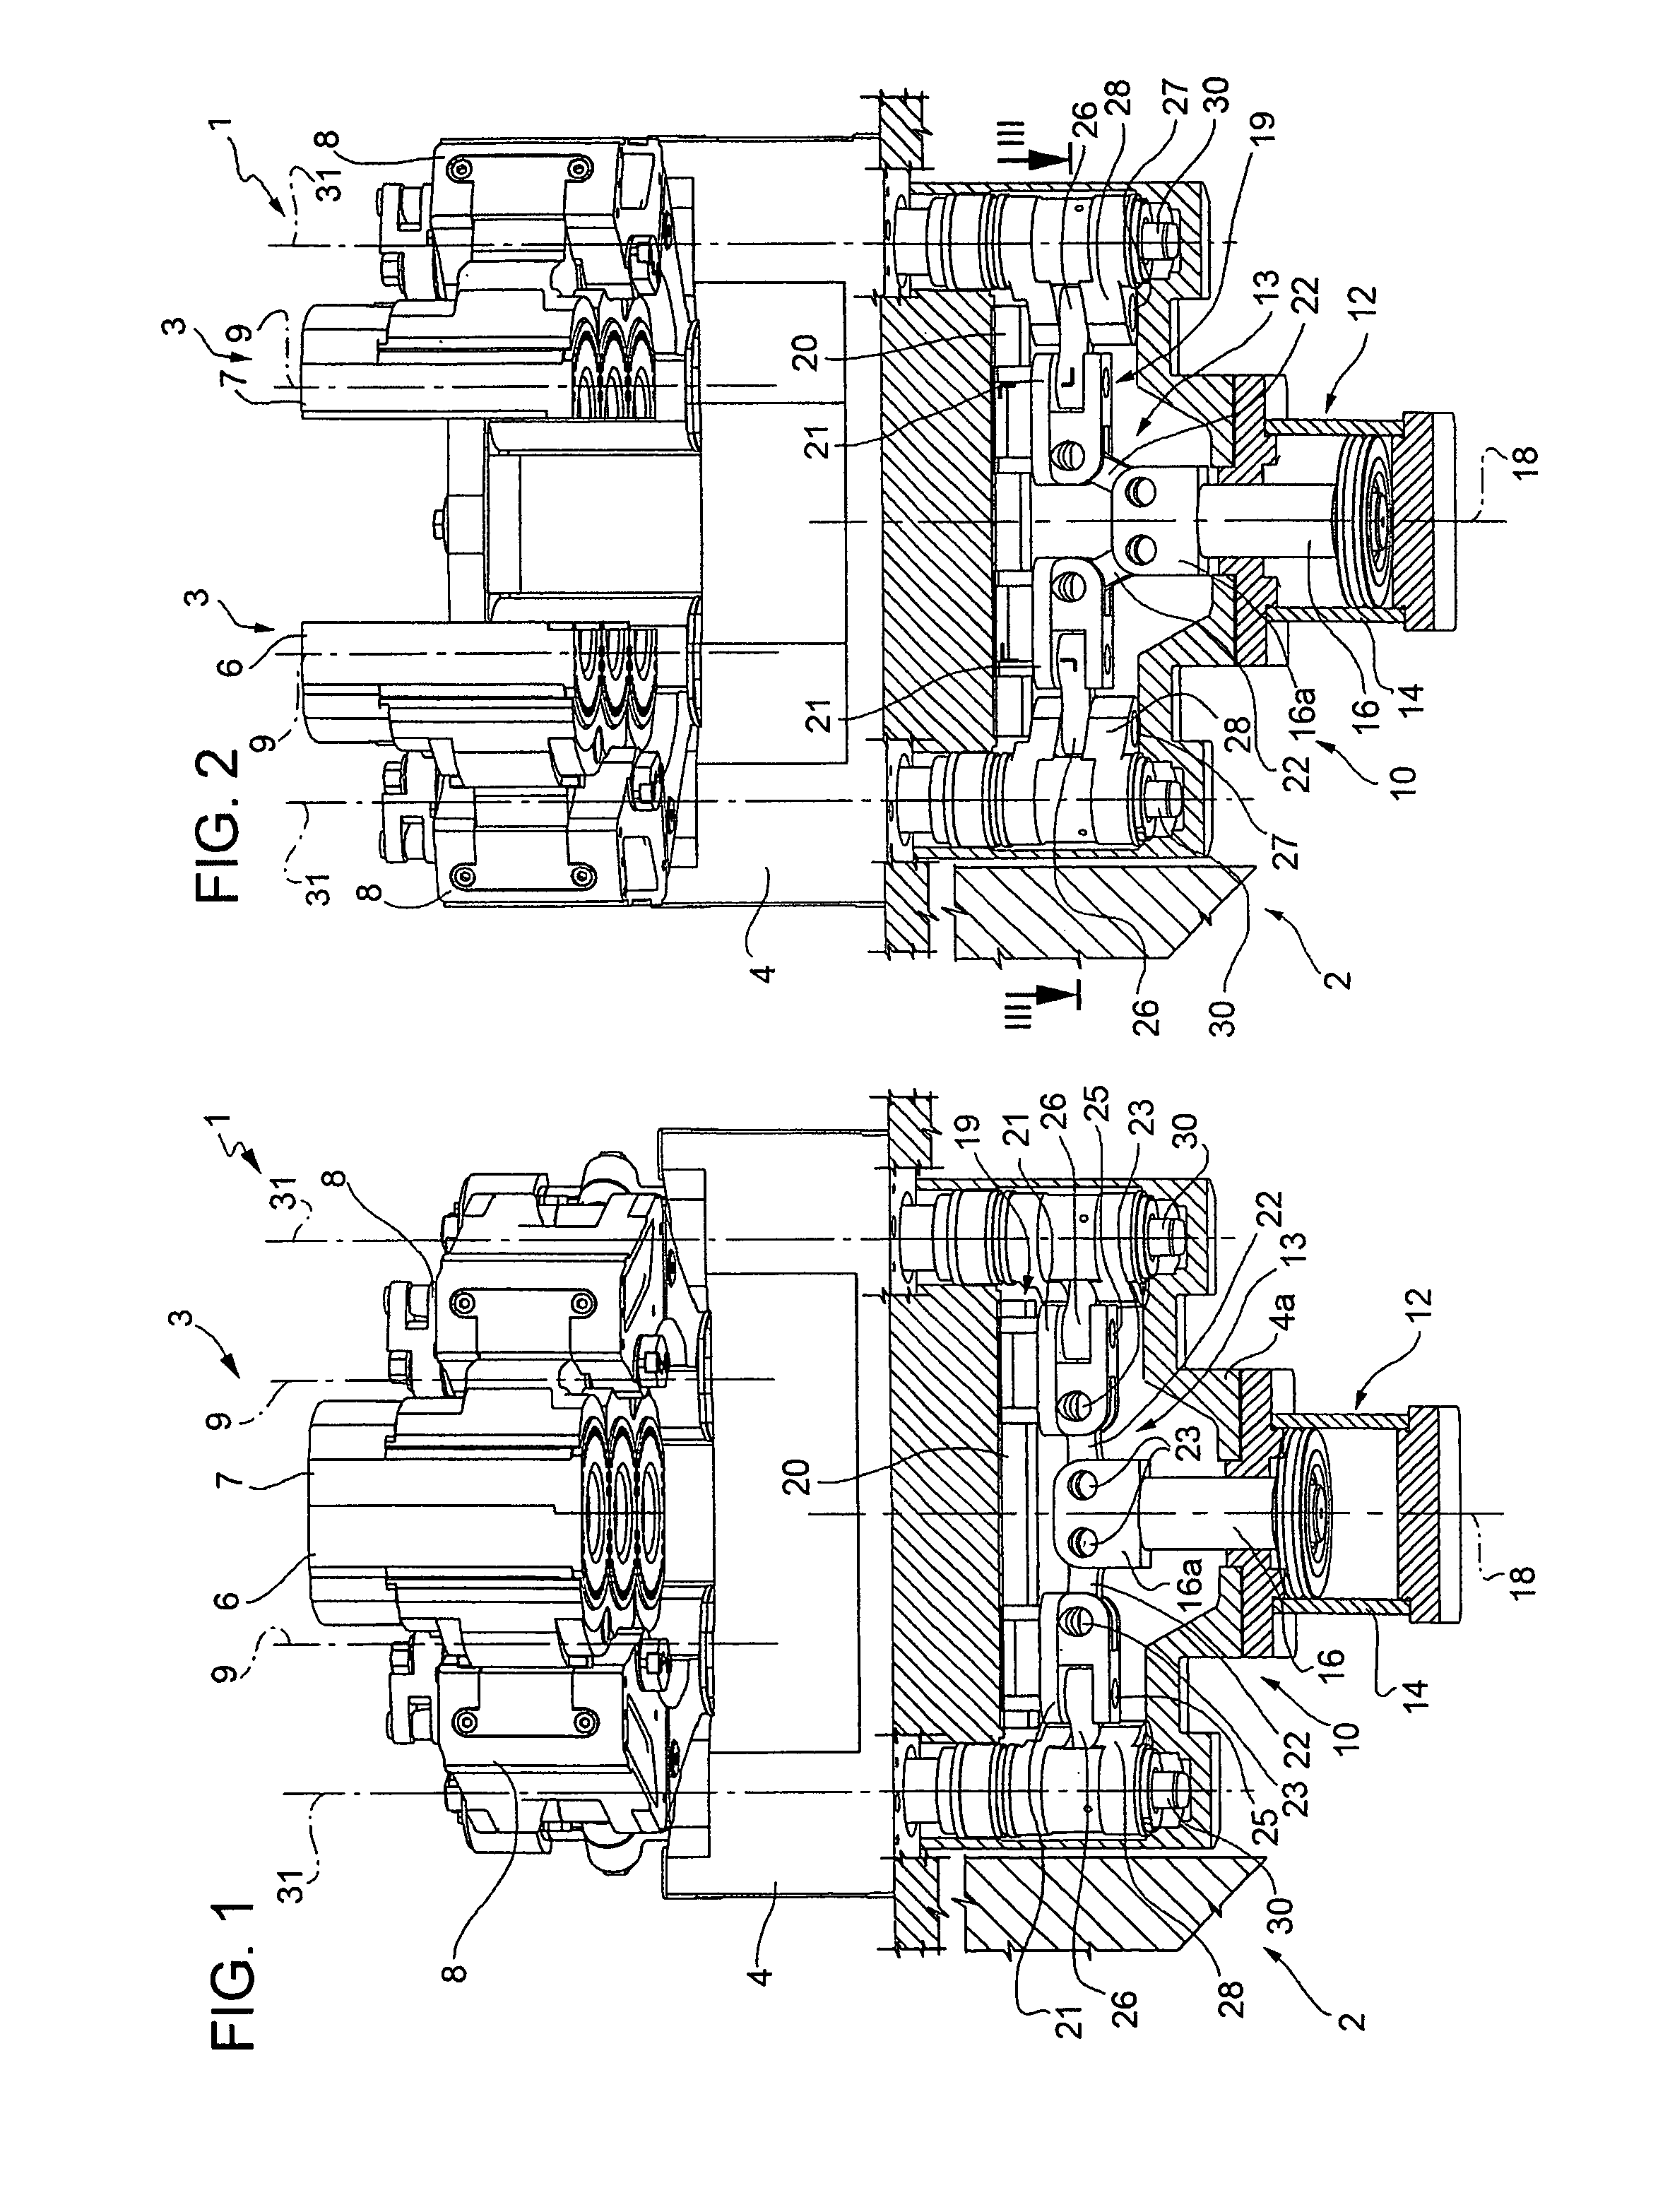 Molds opening/closing group of a forming glass machine items